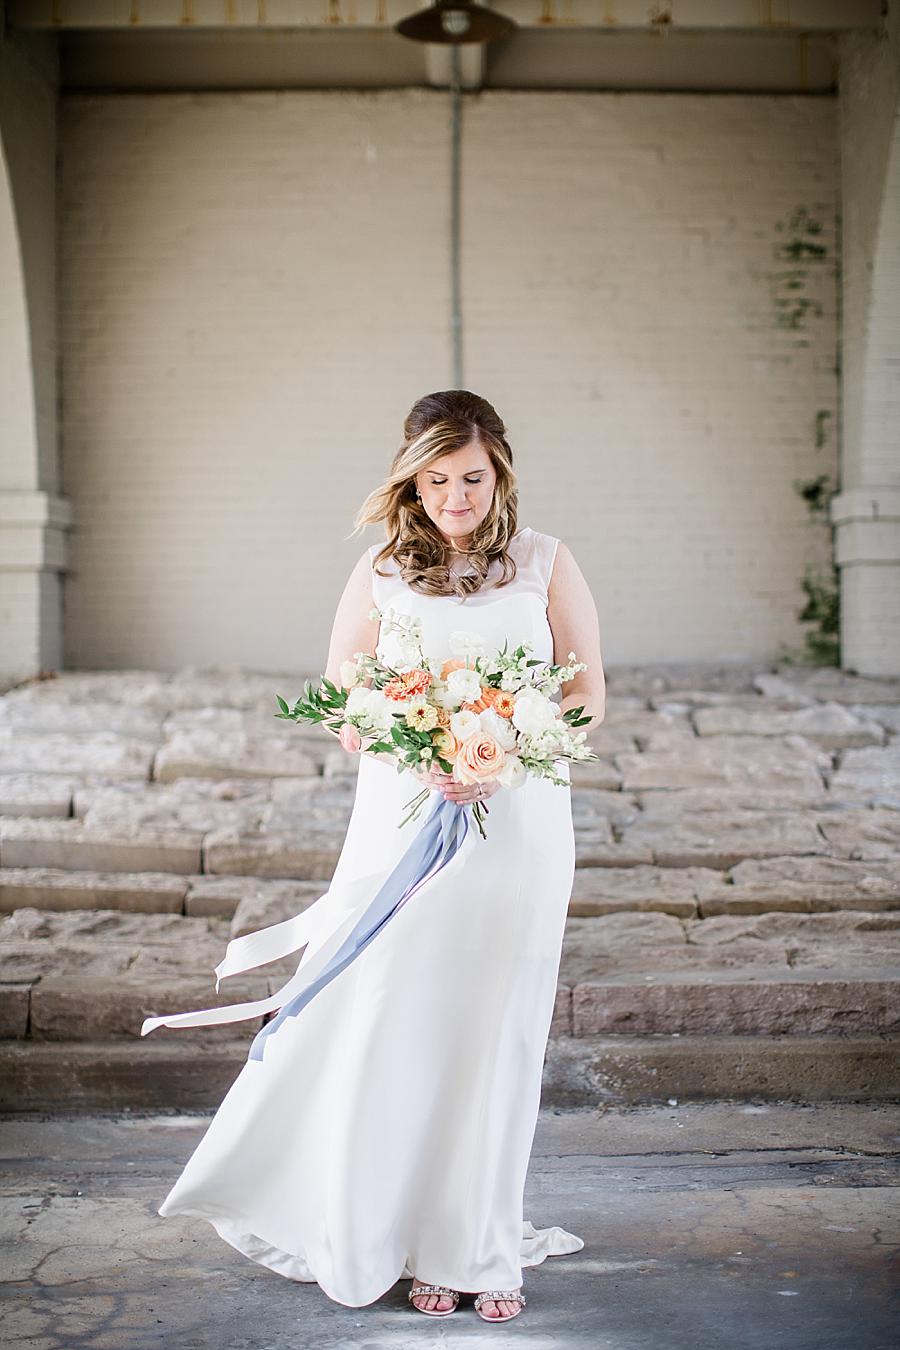 Wind blown at this Southern Railway Station Wedding by Knoxville Wedding Photographer, Amanda May Photos.